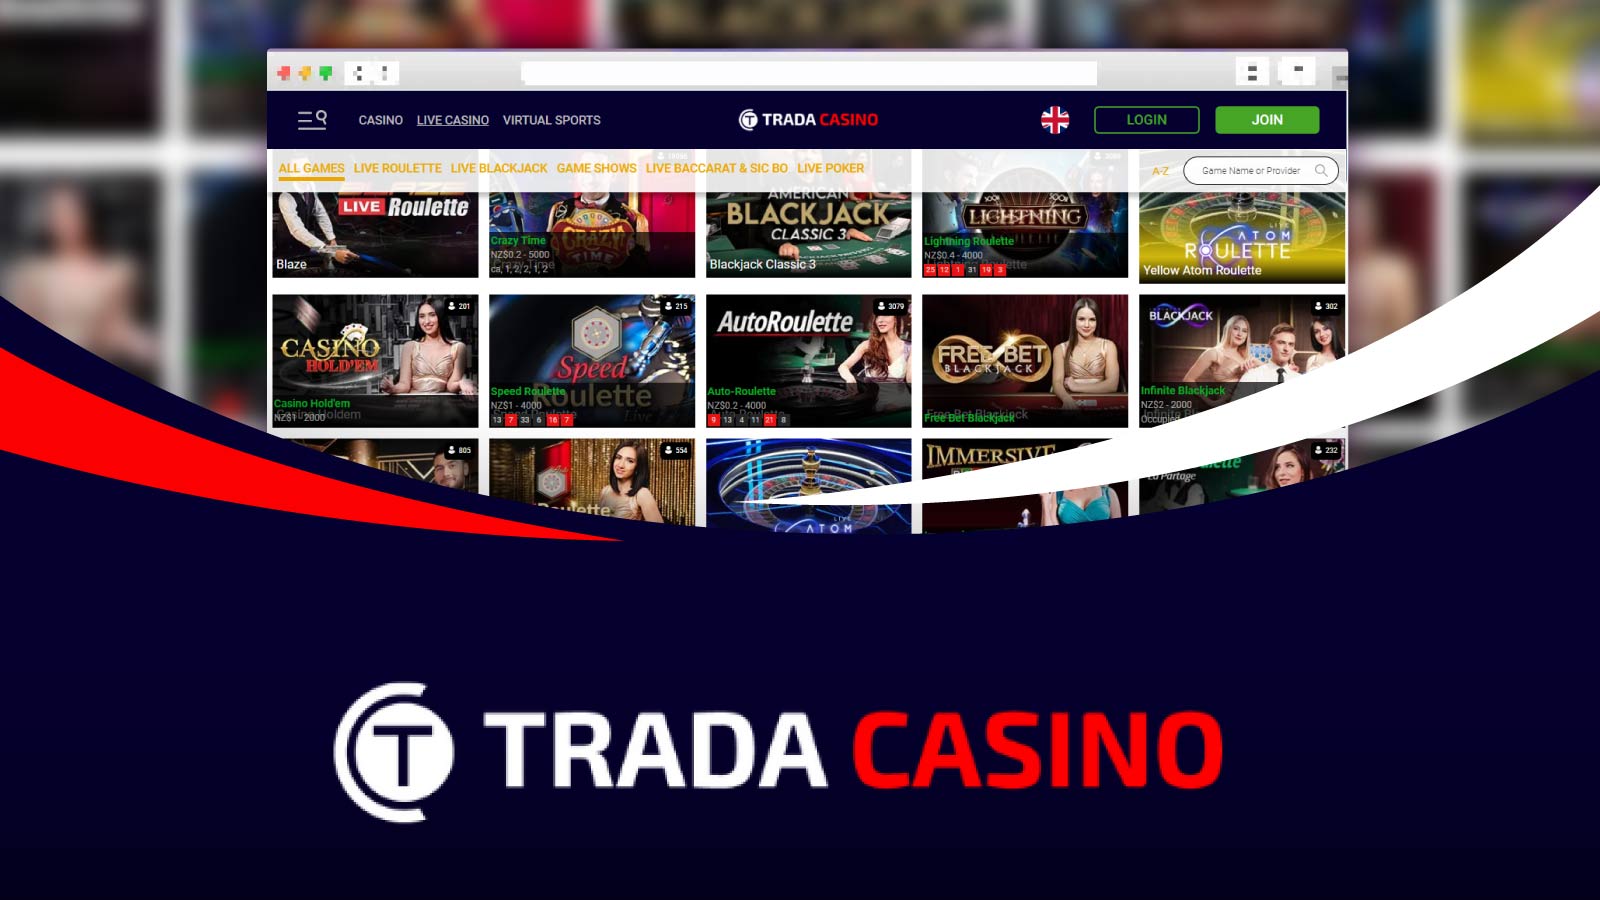 Trada Casino: Better for Slots and Live Games